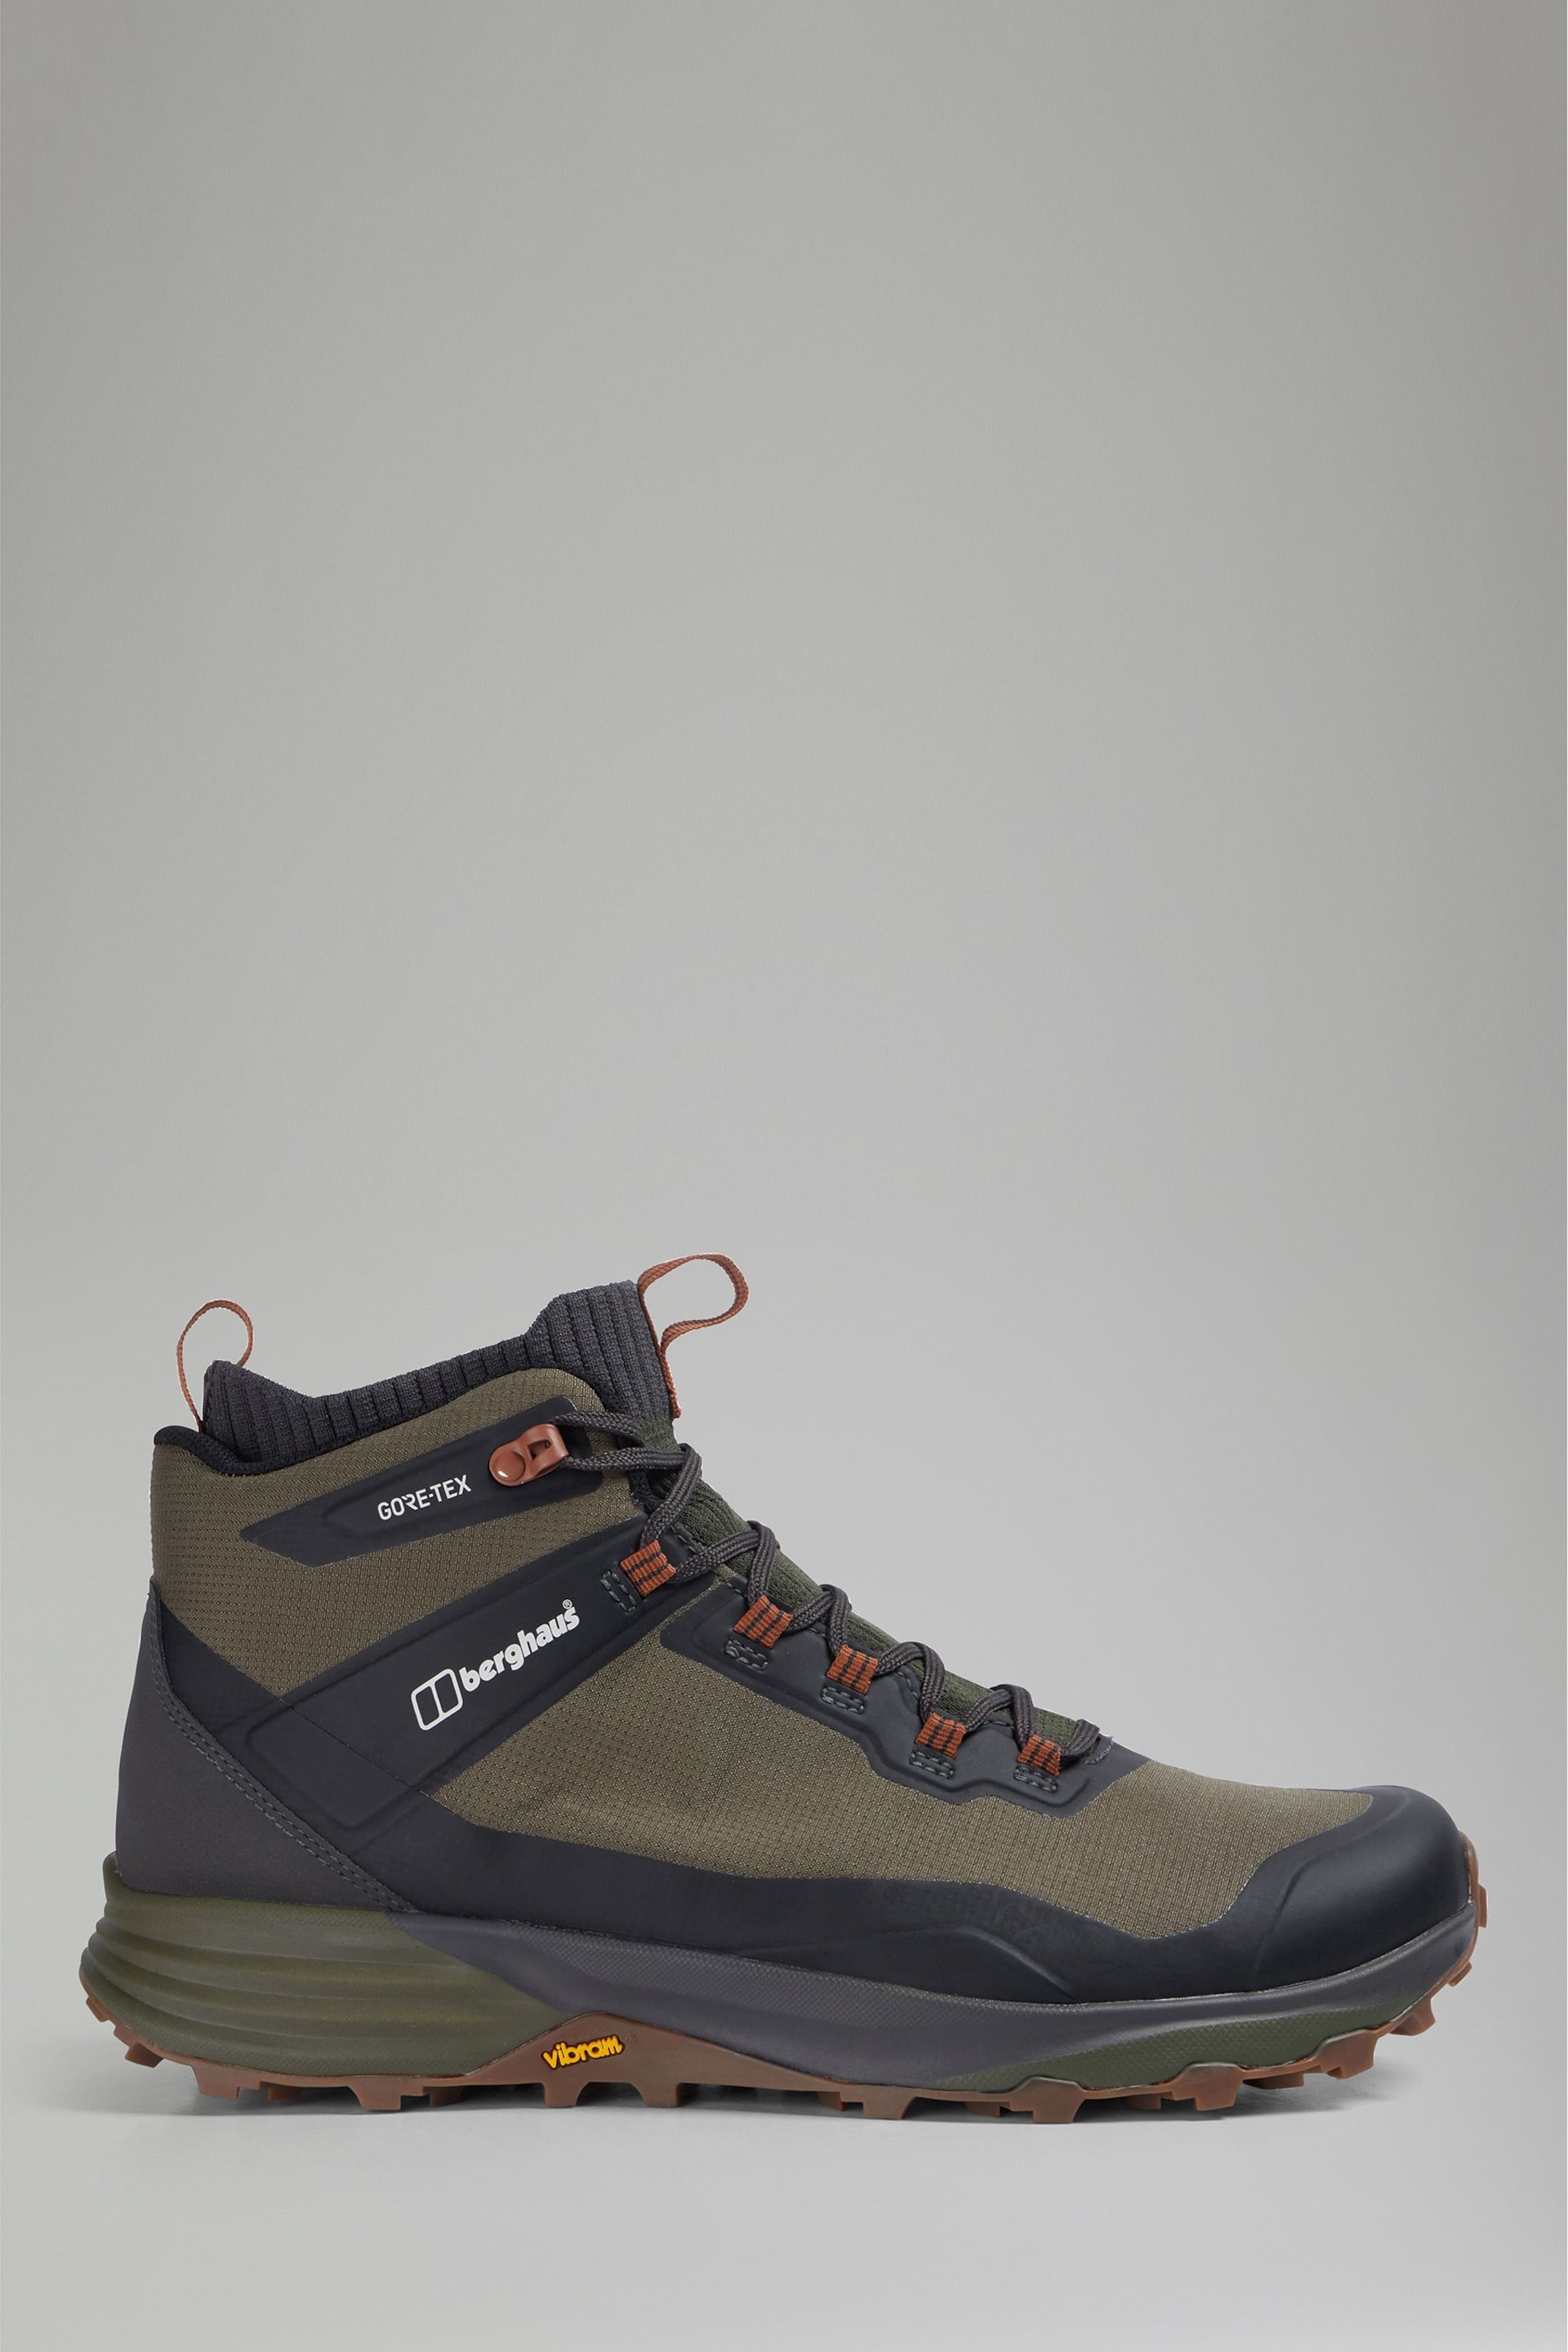 Berghaus VC22 Mid Gore-Tex Boots - Image 1 of 4